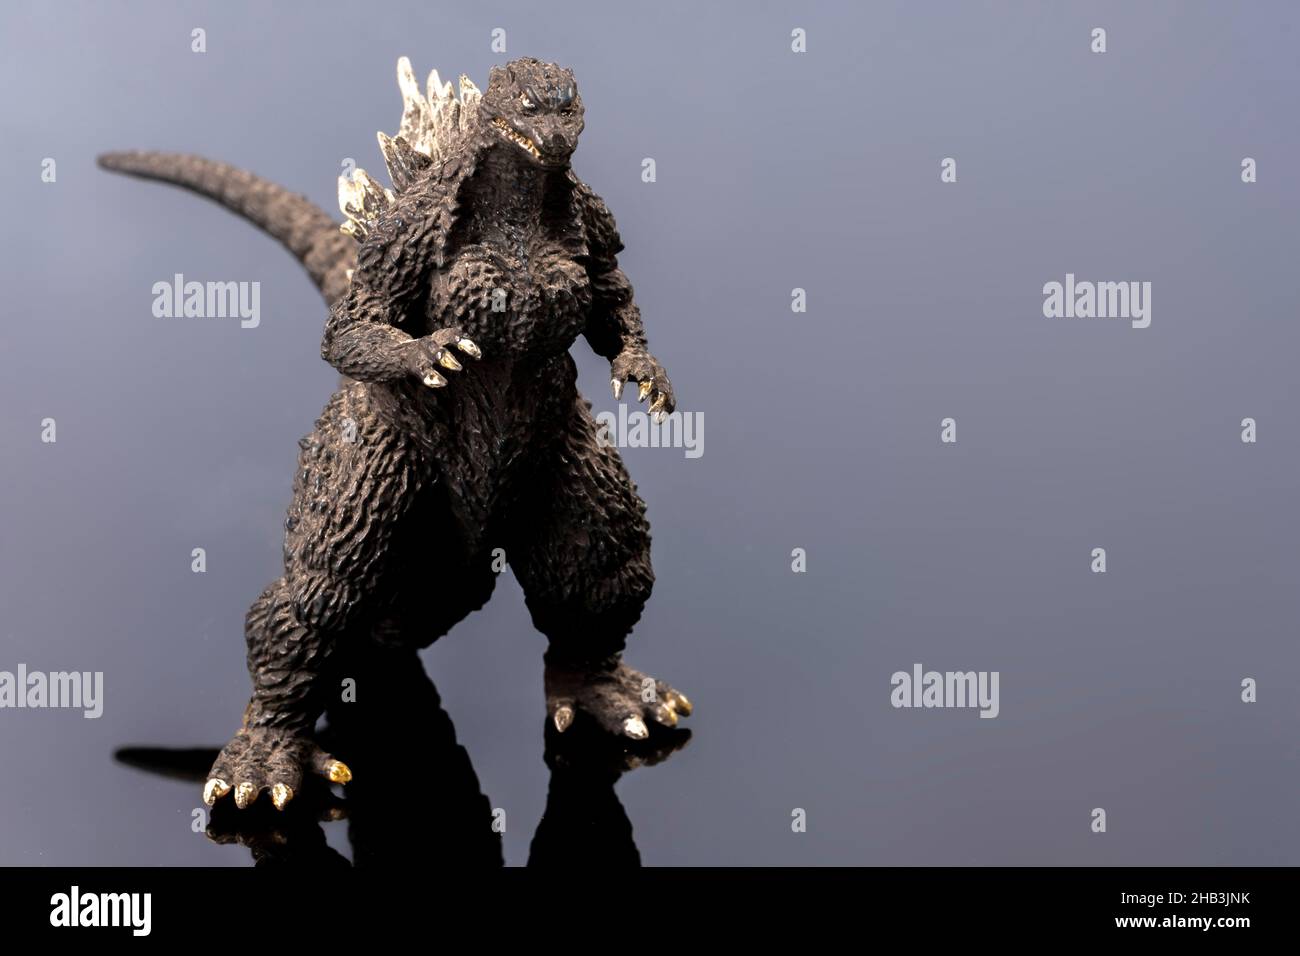 A black ugly looking lizard toy. Legendary Asian monster. A giant figure mascot. Plastic creature in detail on reflecting surface. Cultural object. Stock Photo